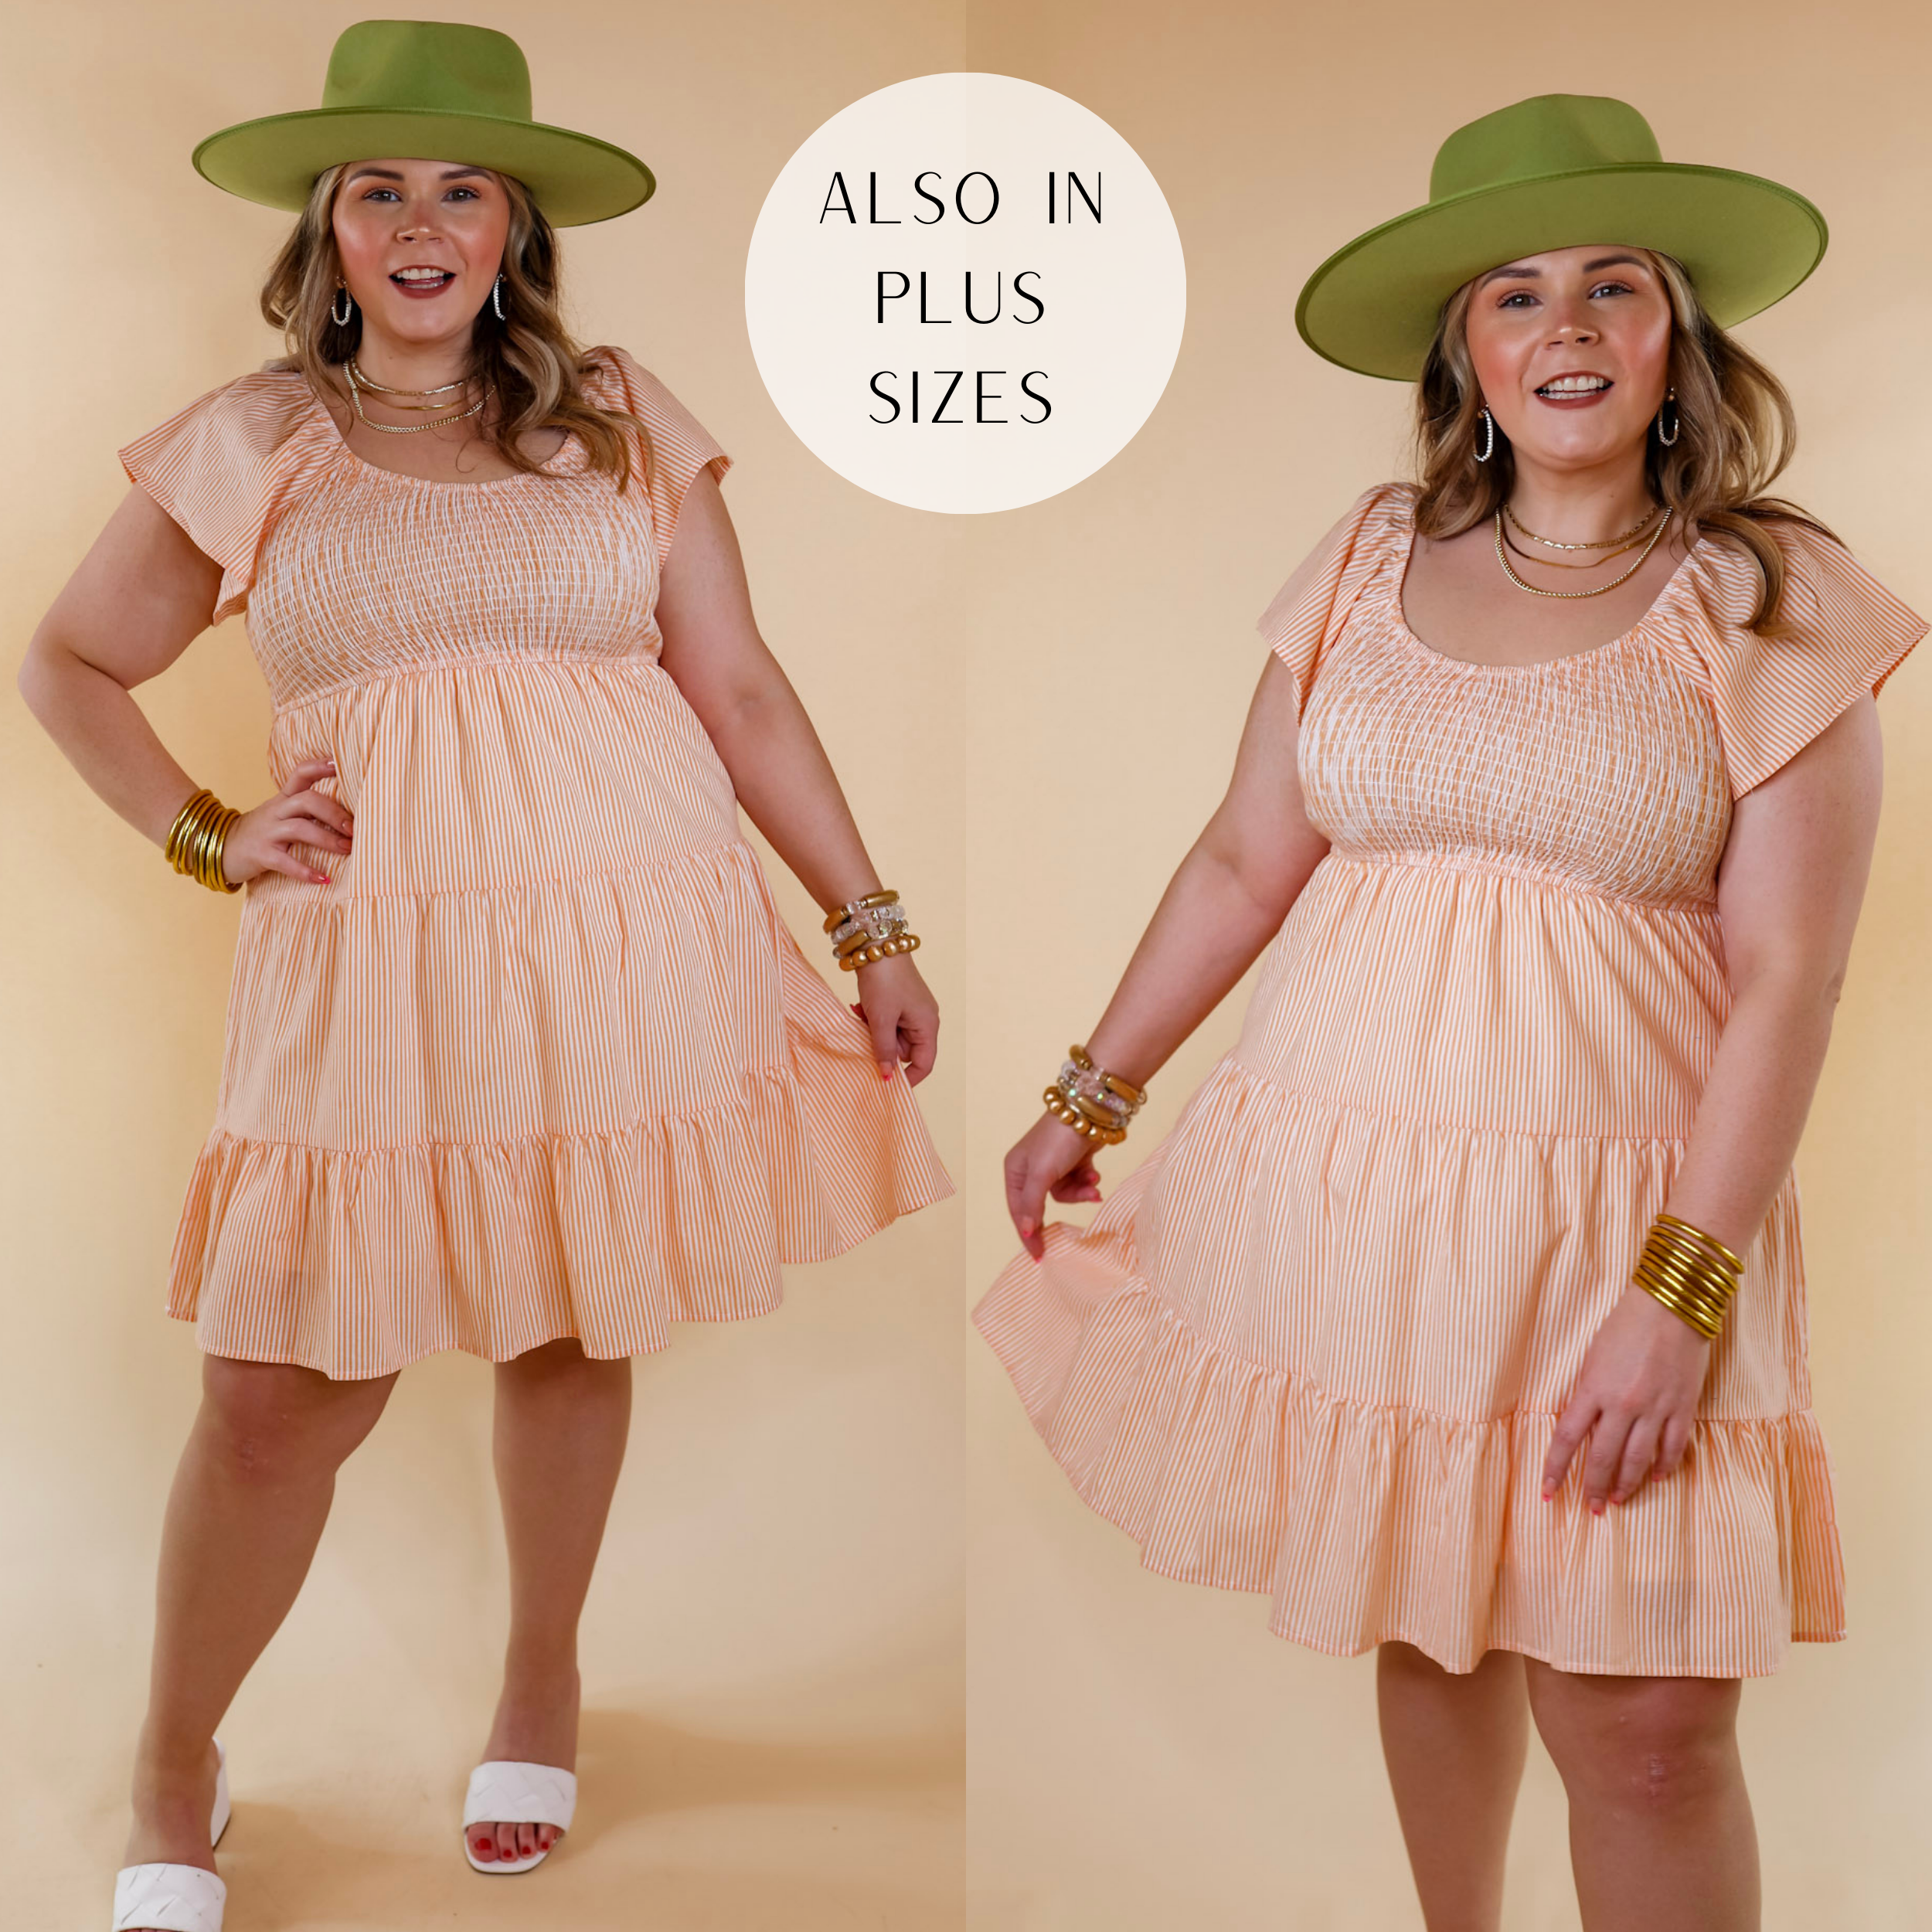 Model is wearing an orange pin stripe dress with a smocked bodice, short sleeves, and a tiered skirt. Model has this dress paired with a green hat, gold jewelry, and white sandals.